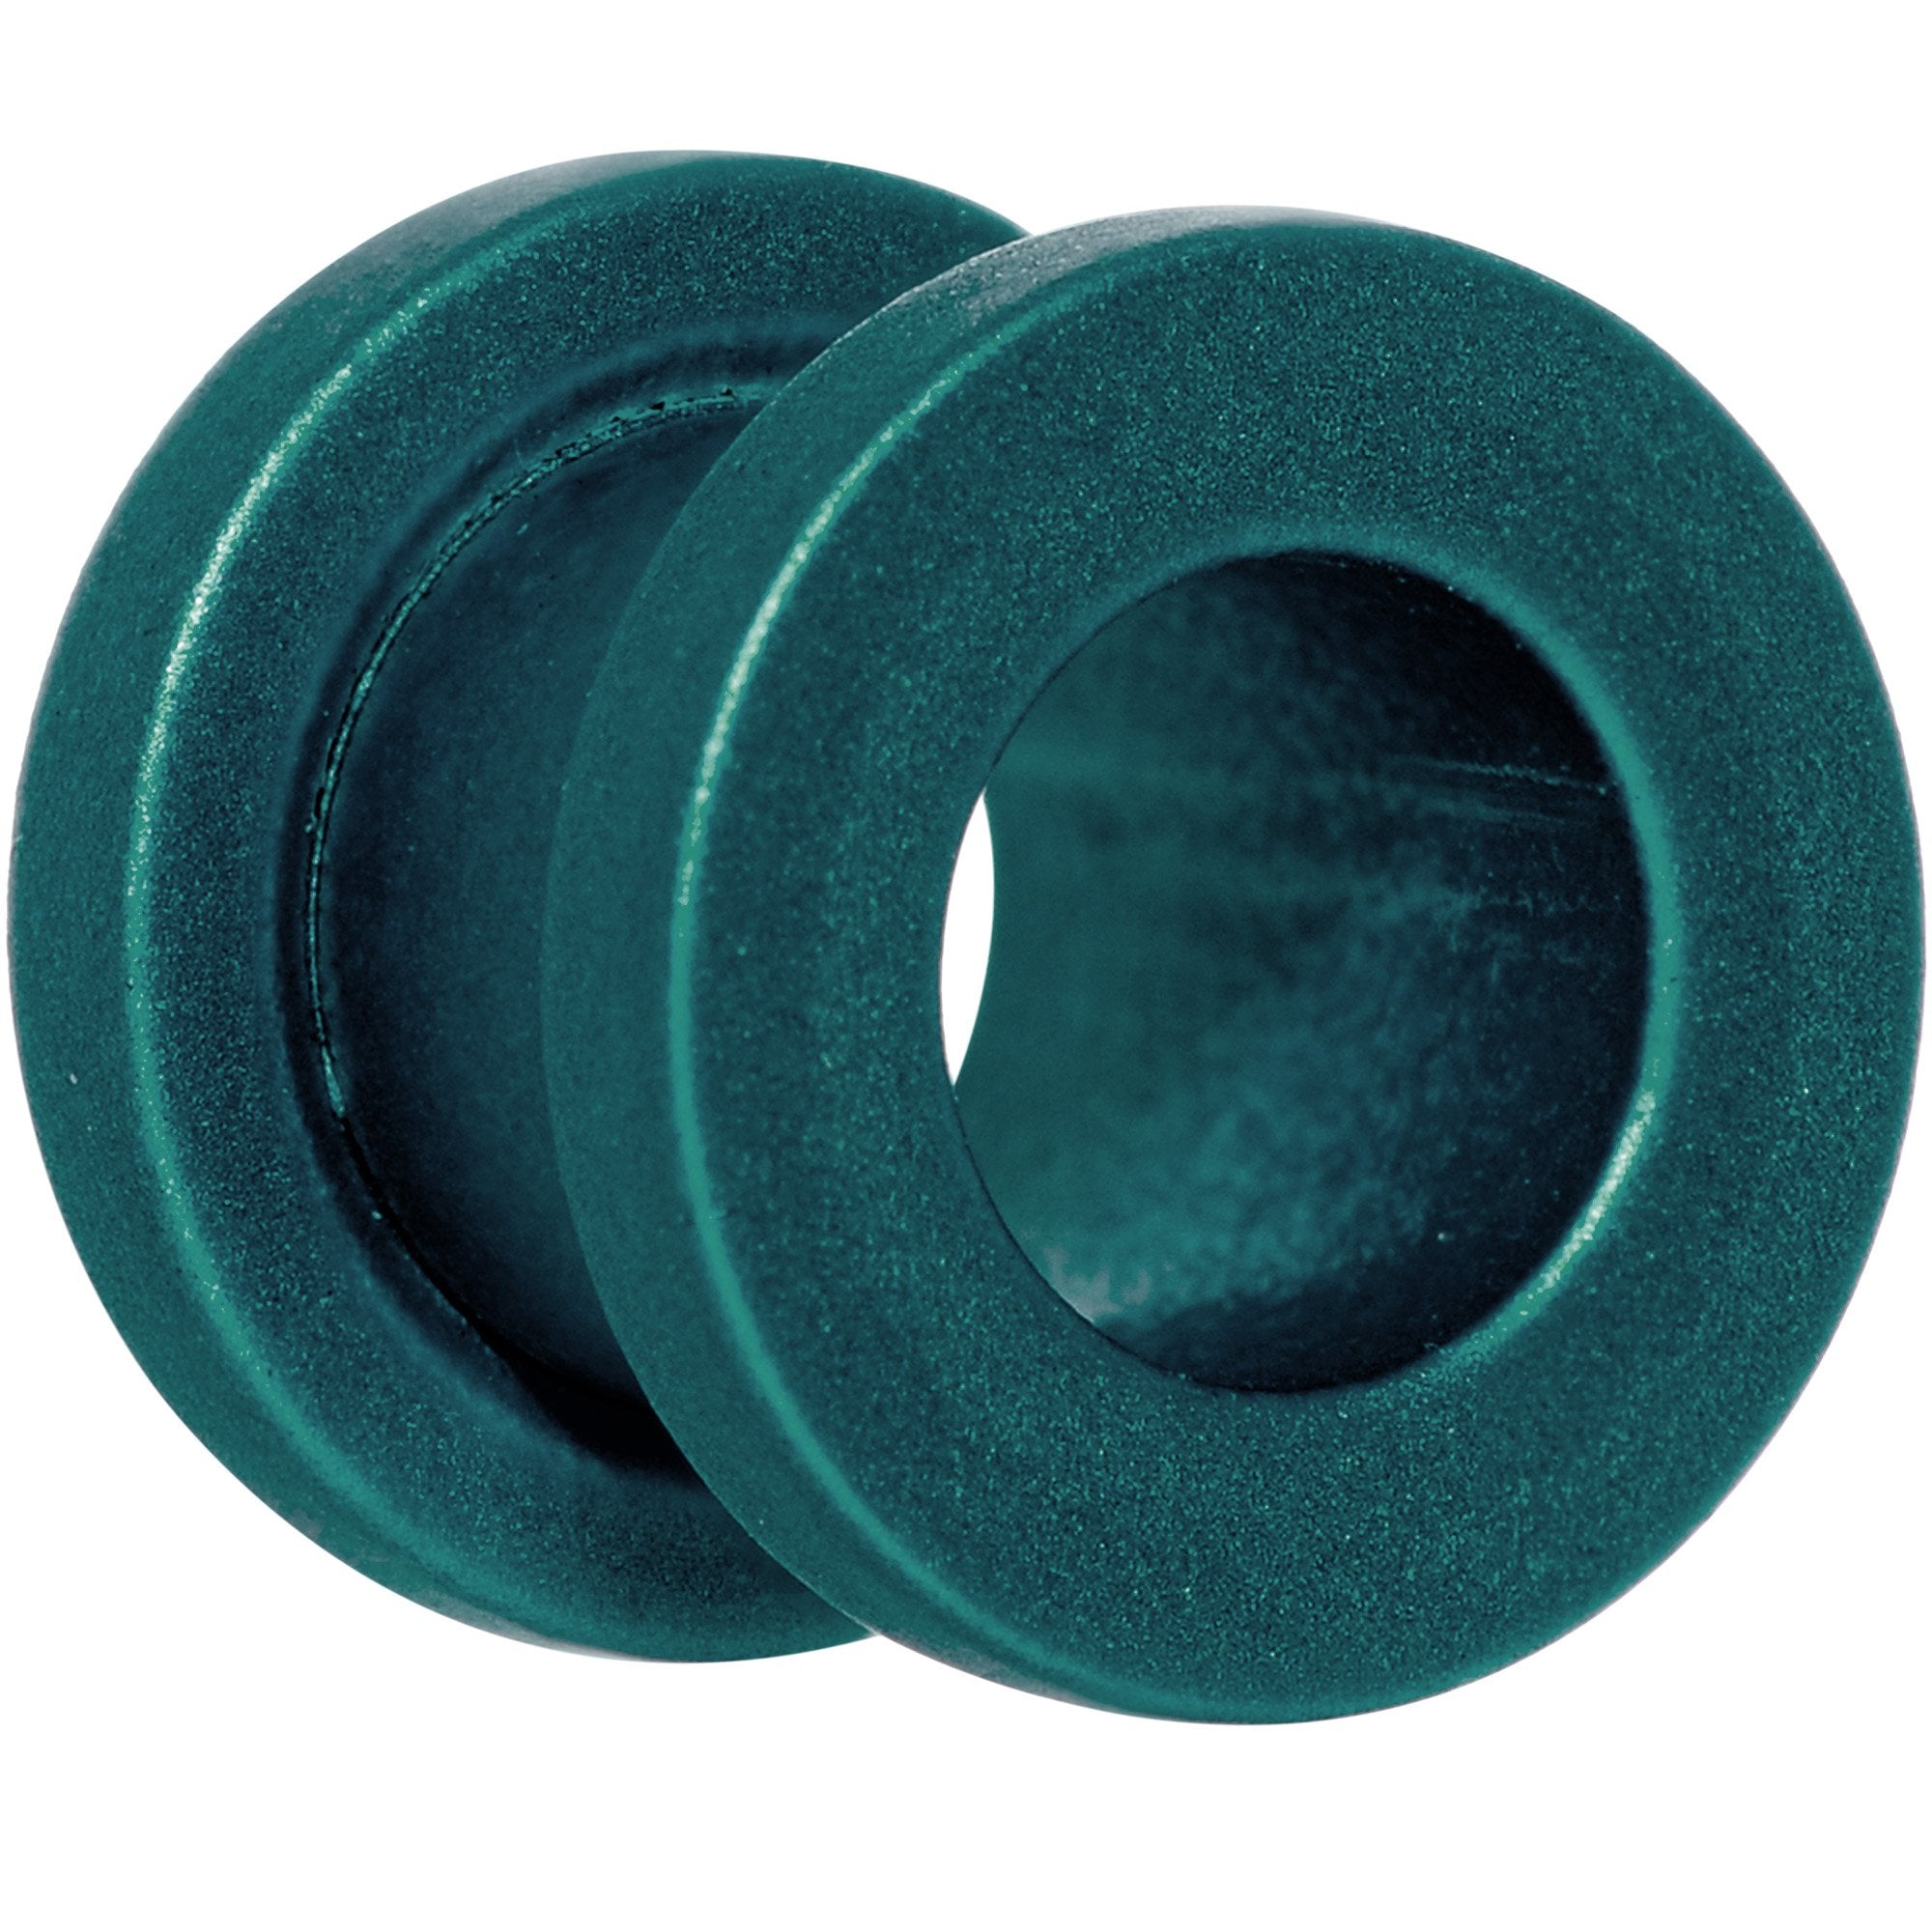 Teal Matte Silicone Screw Fit Tunnel Plug Set 6mm to 25mm